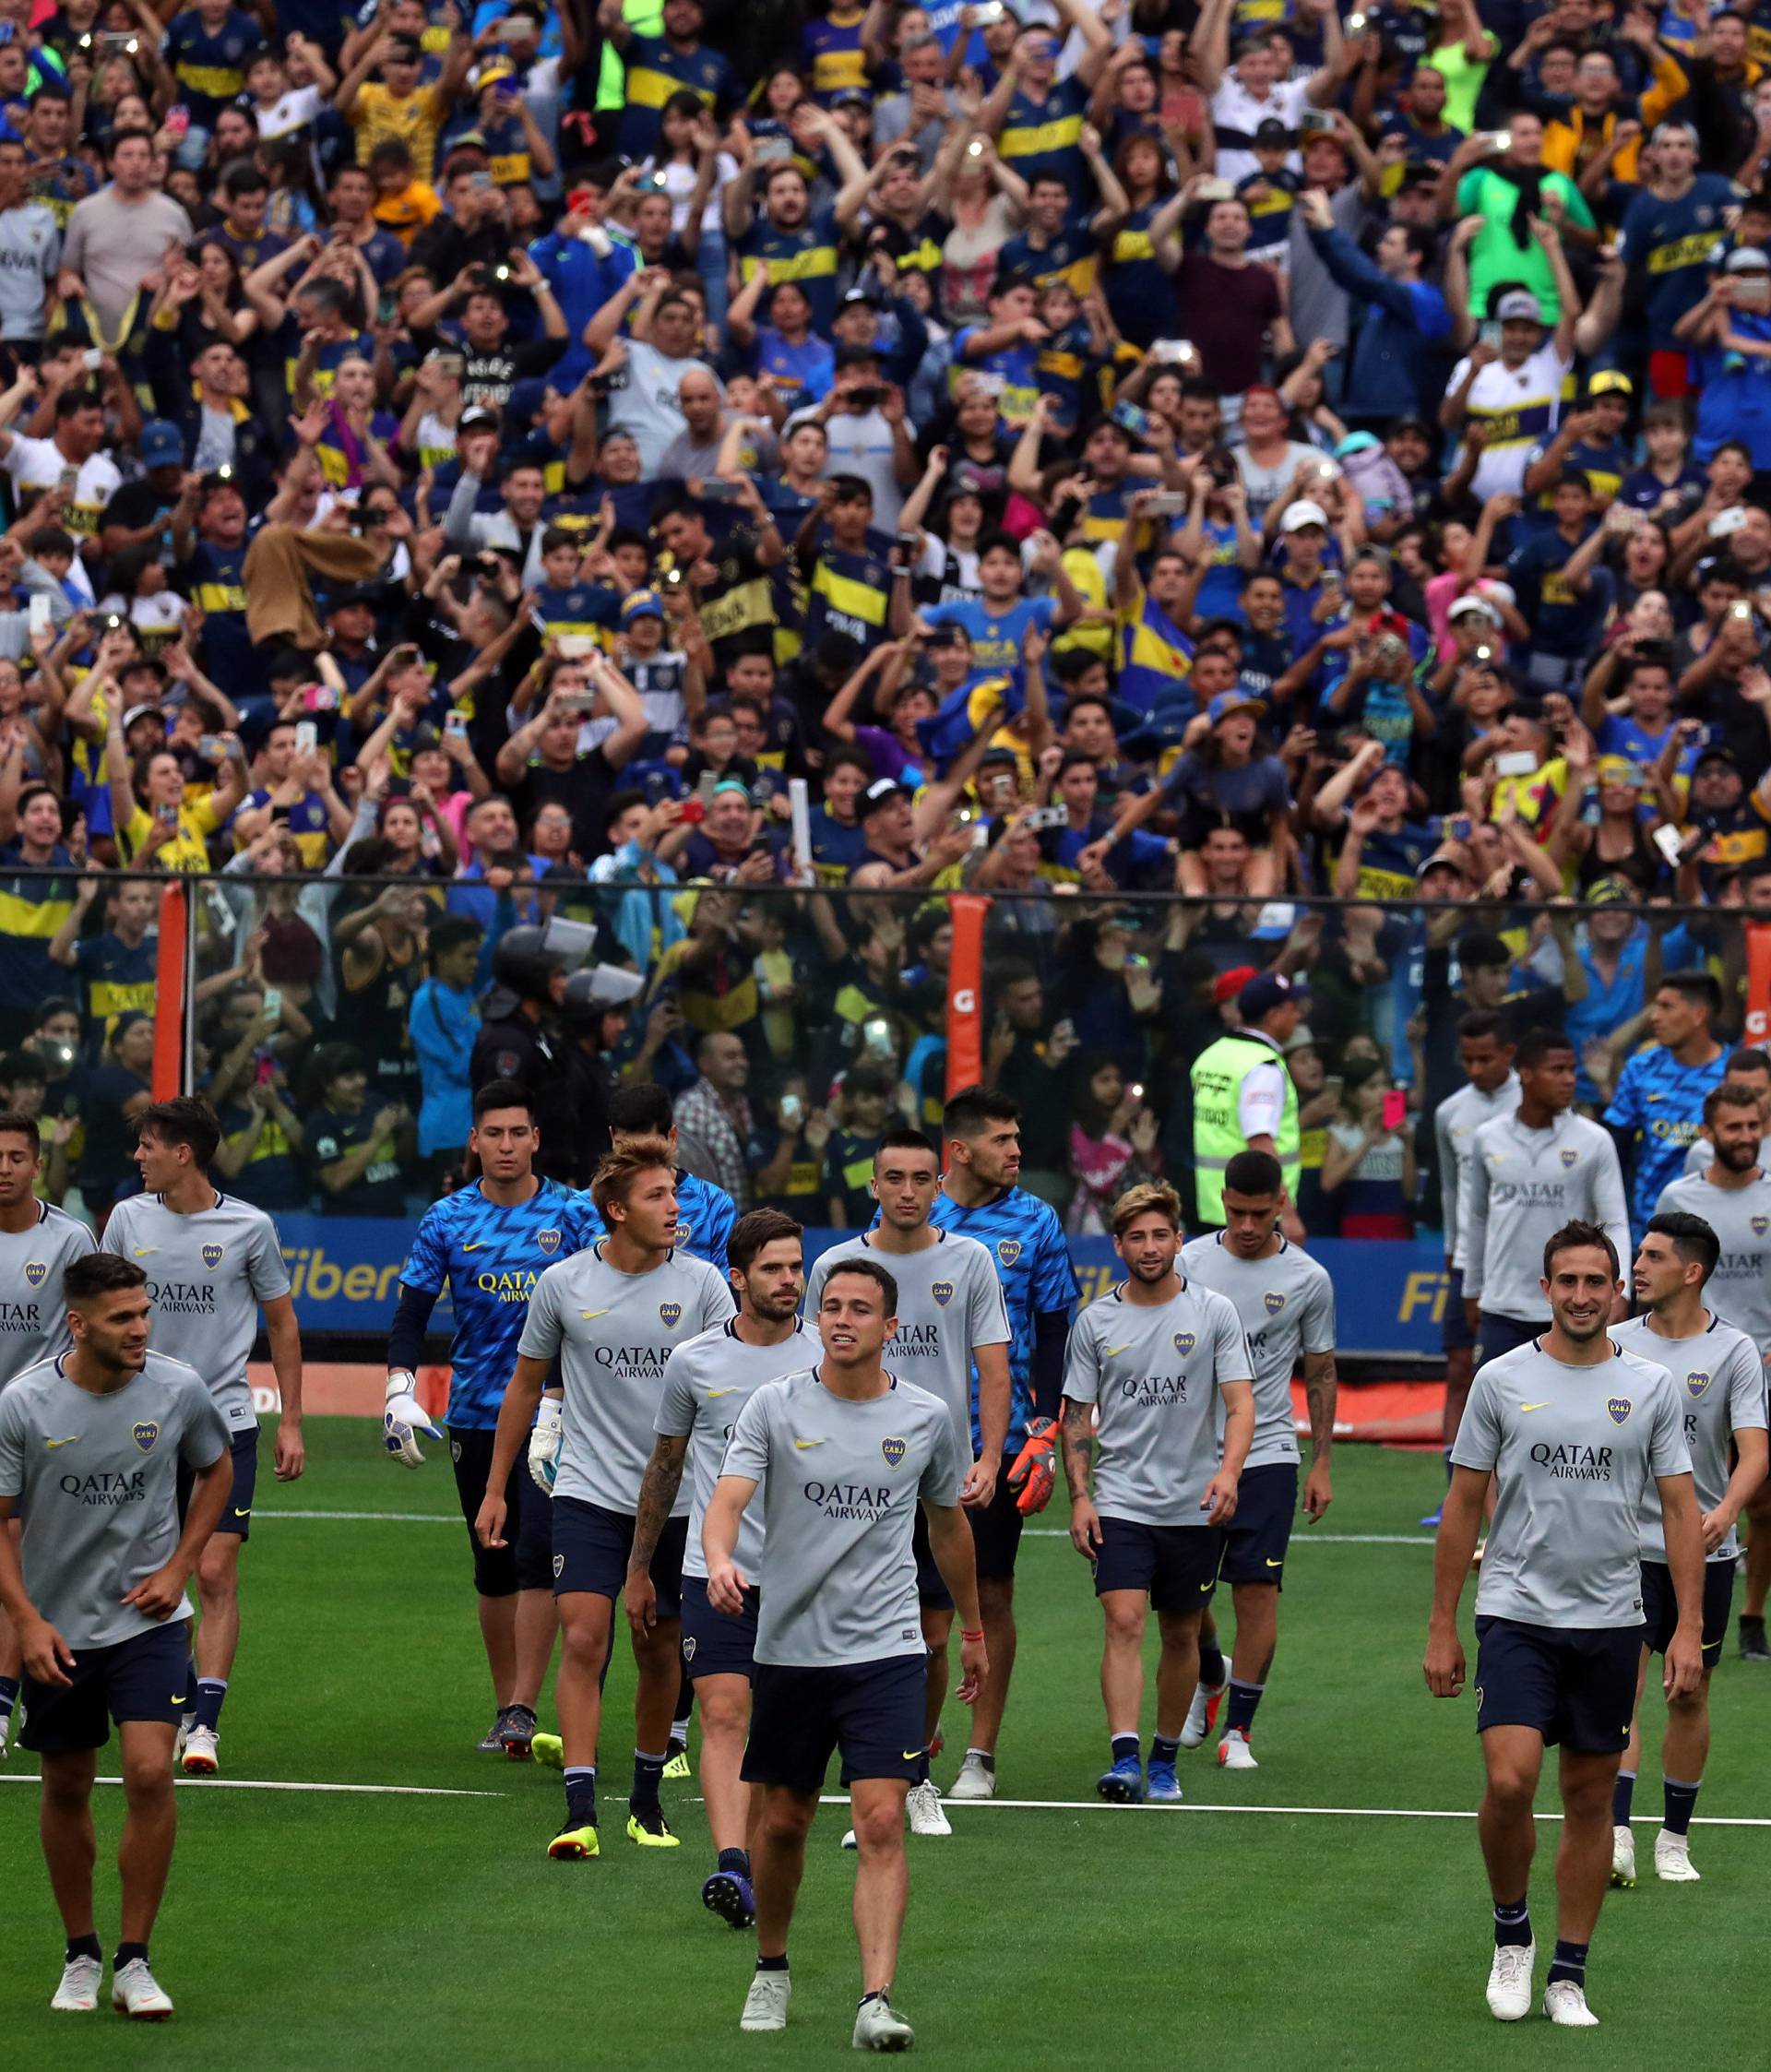 Boca Juniors' players enter the field during a training session open to the public ahead of their second leg Copa Libertadores final match against River Plate in Buenos Aires